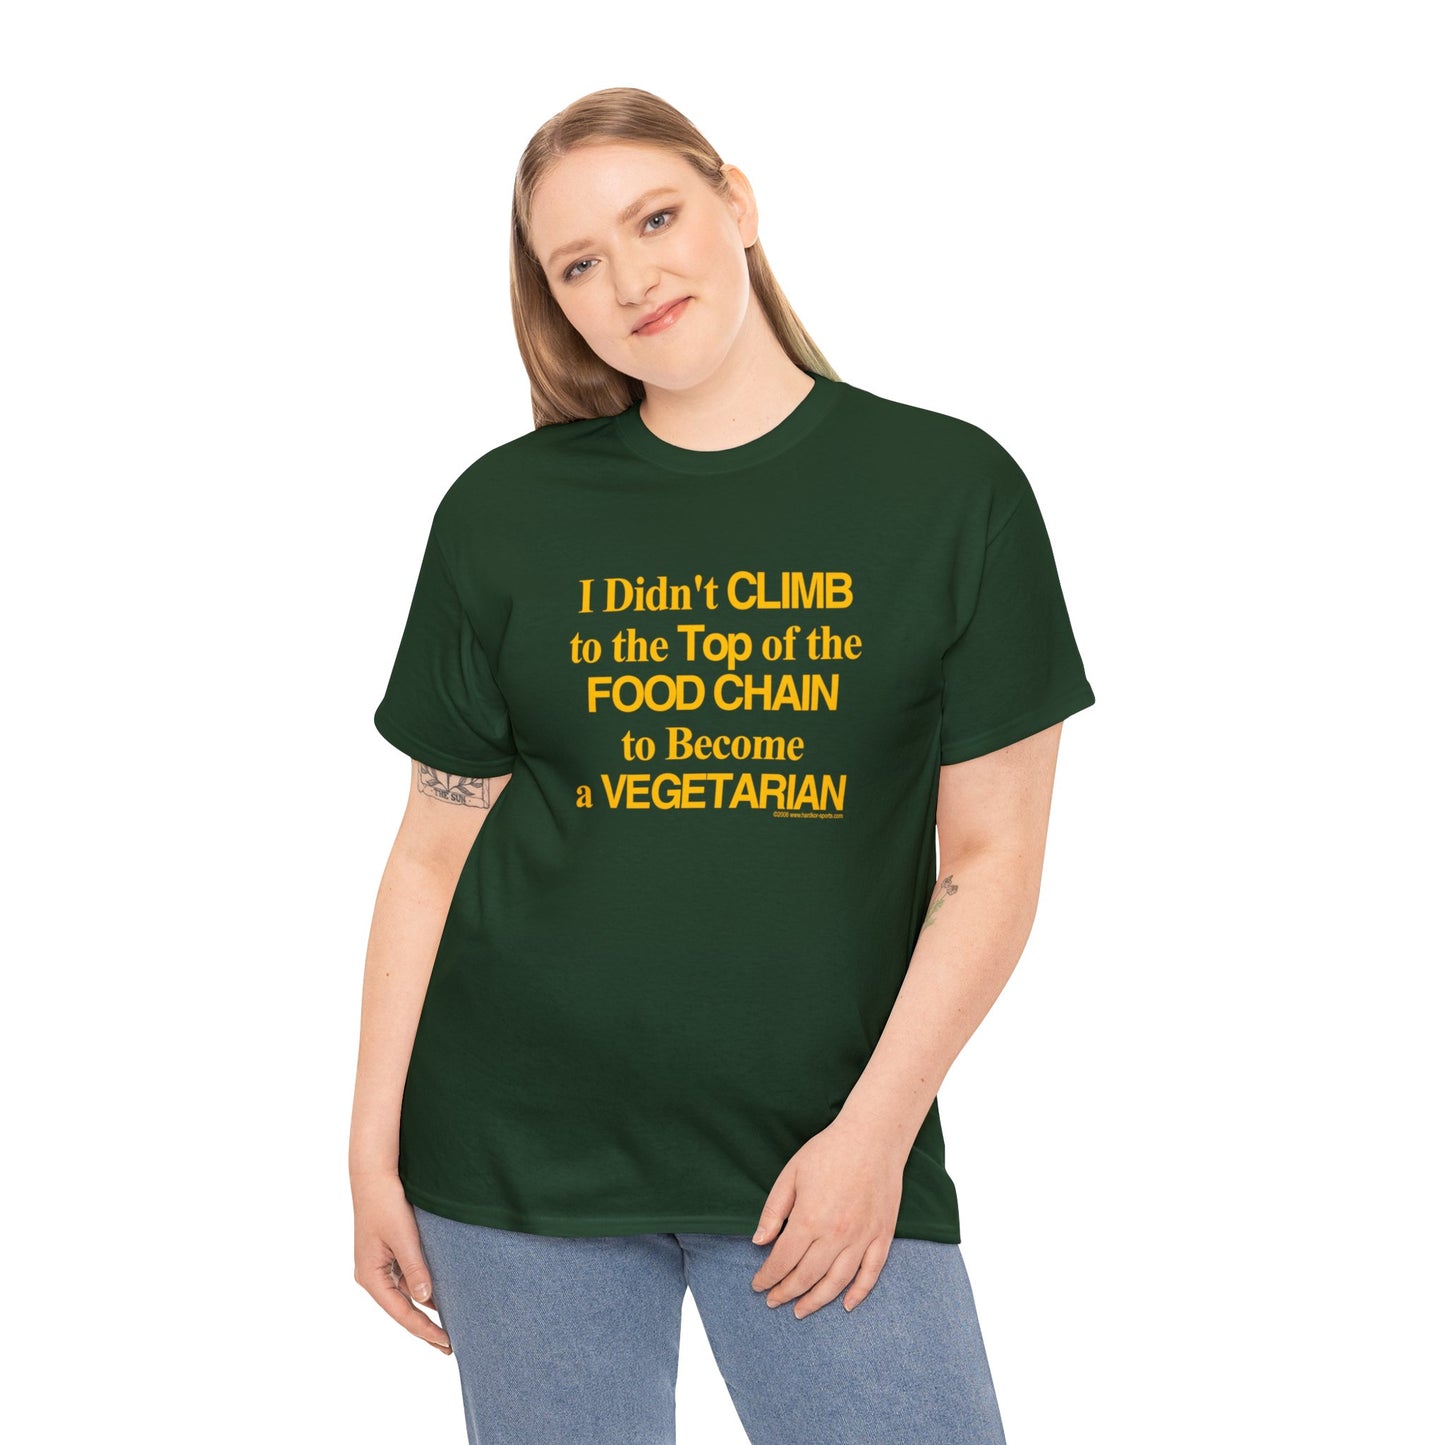 I Didn't Climb to the Top of the Food Chain to Become a Vegetarian,  Carnivore T-shirt, Meat Lovers Tee, funny t-shirt, humorous t-shirt,